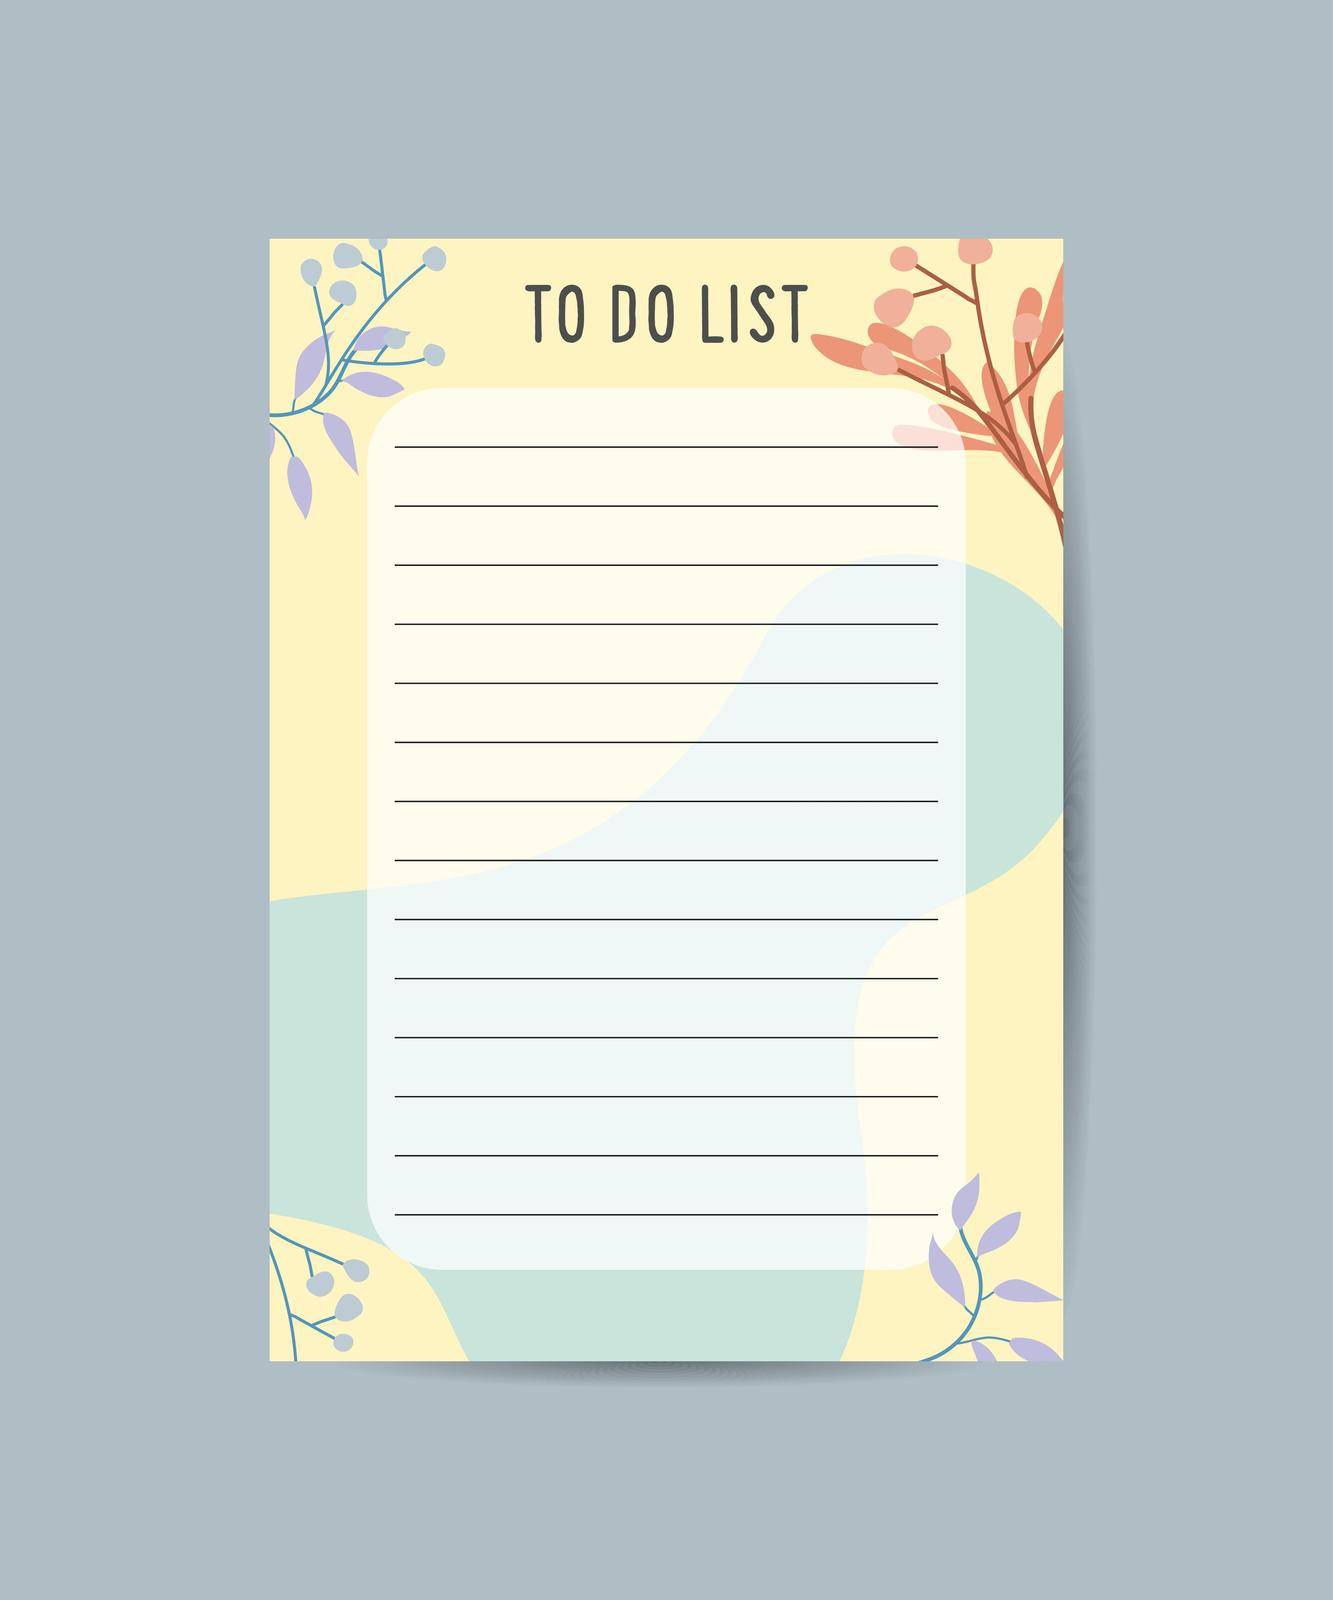 to-do list plan with flat design illustration. Templates for agendas, schedules, planners, notebooks, and more. by ANITA